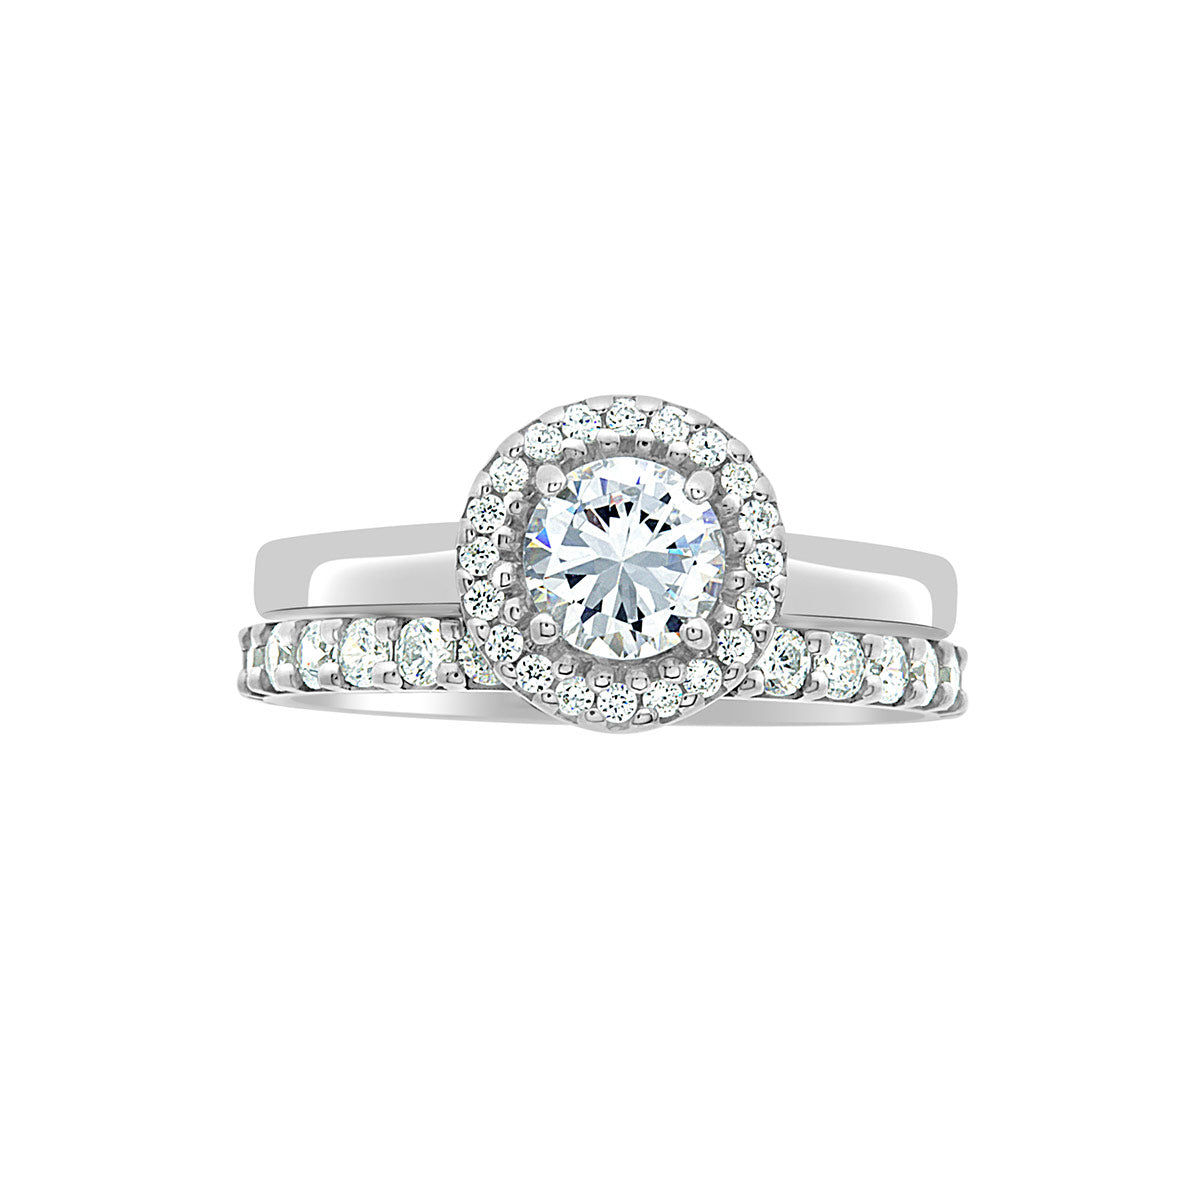 Round Vintage Engagement Ring in a horizontal position against a white background. Also featuring a matching diamond set wedding ring